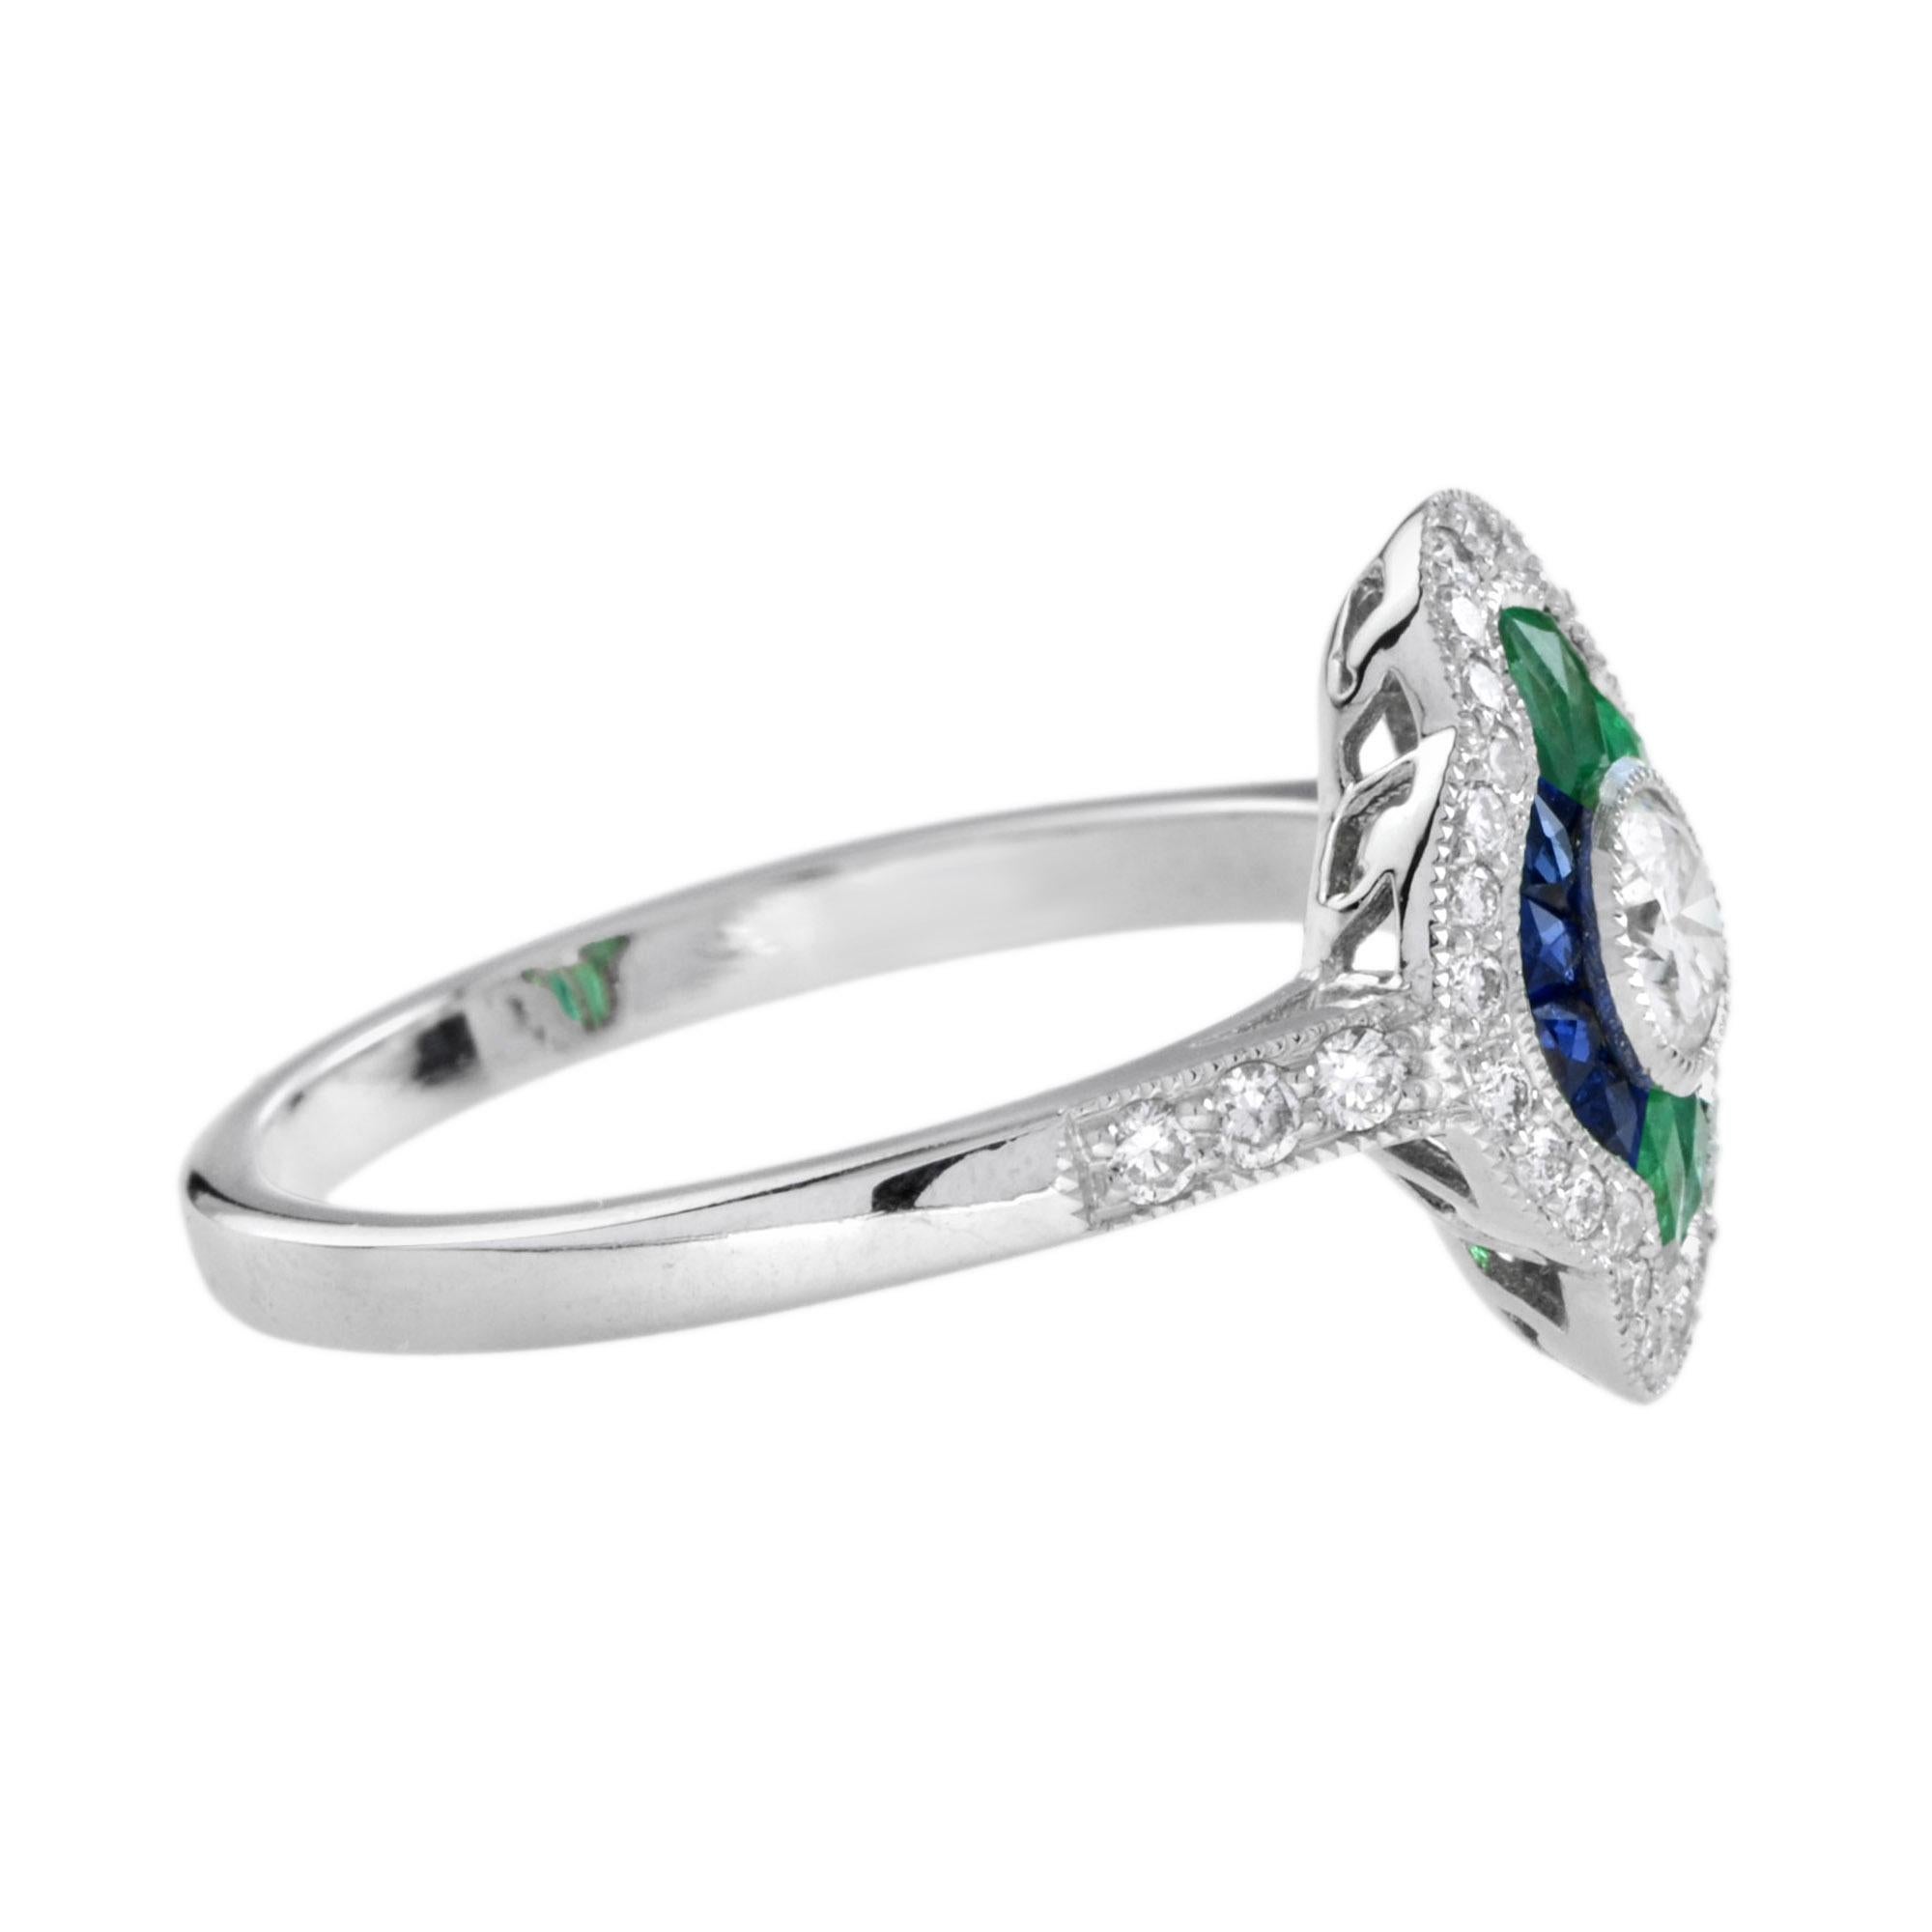 For Sale:  Diamond Sapphire Emerald Art Deco Style Engagement Ring in 18k White Gold 4